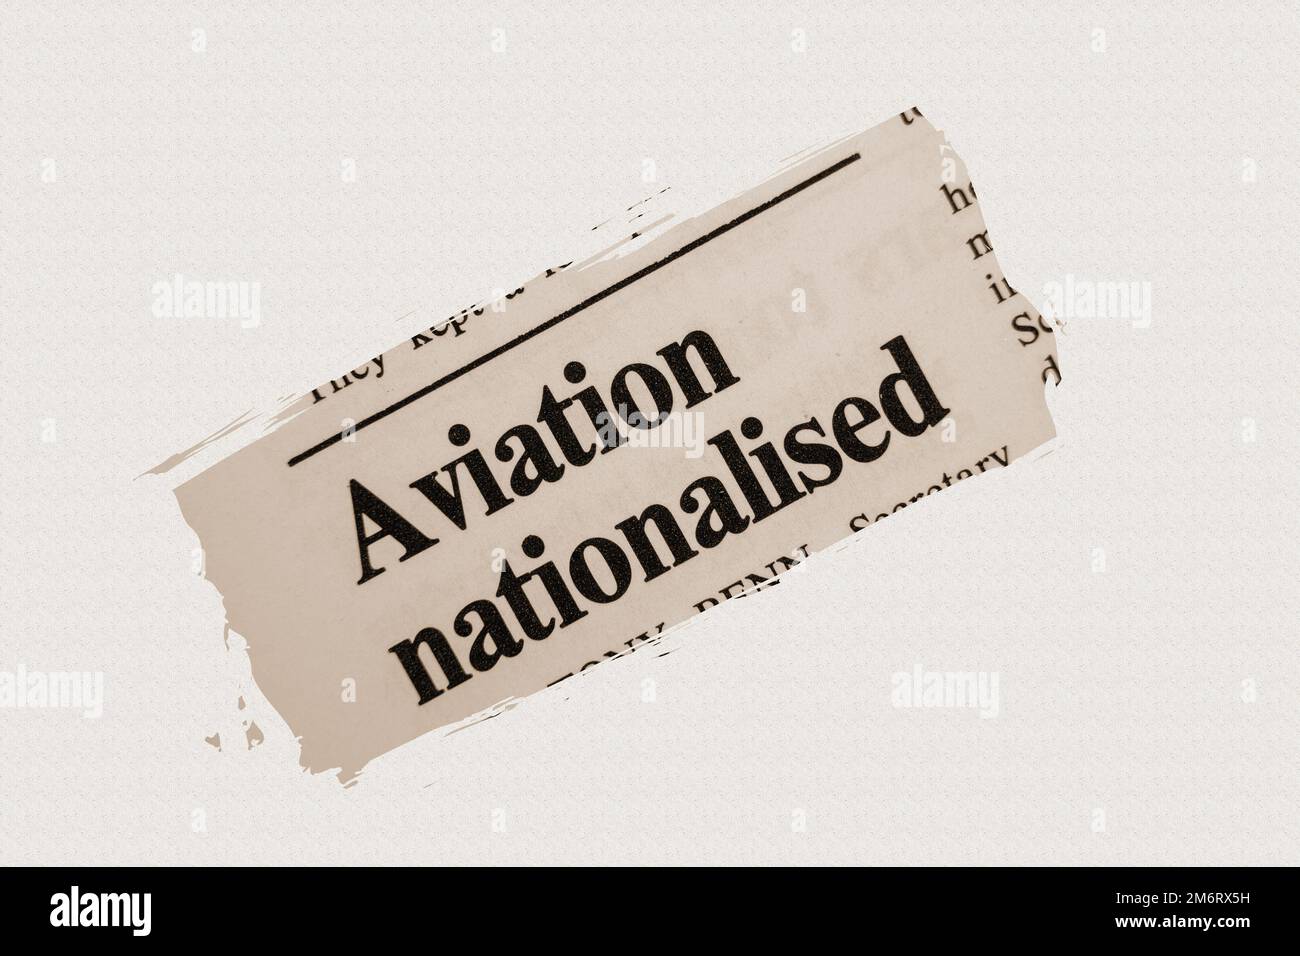 news story from 1975 newspaper headline article title - Aviation nationalised in sepia Stock Photo